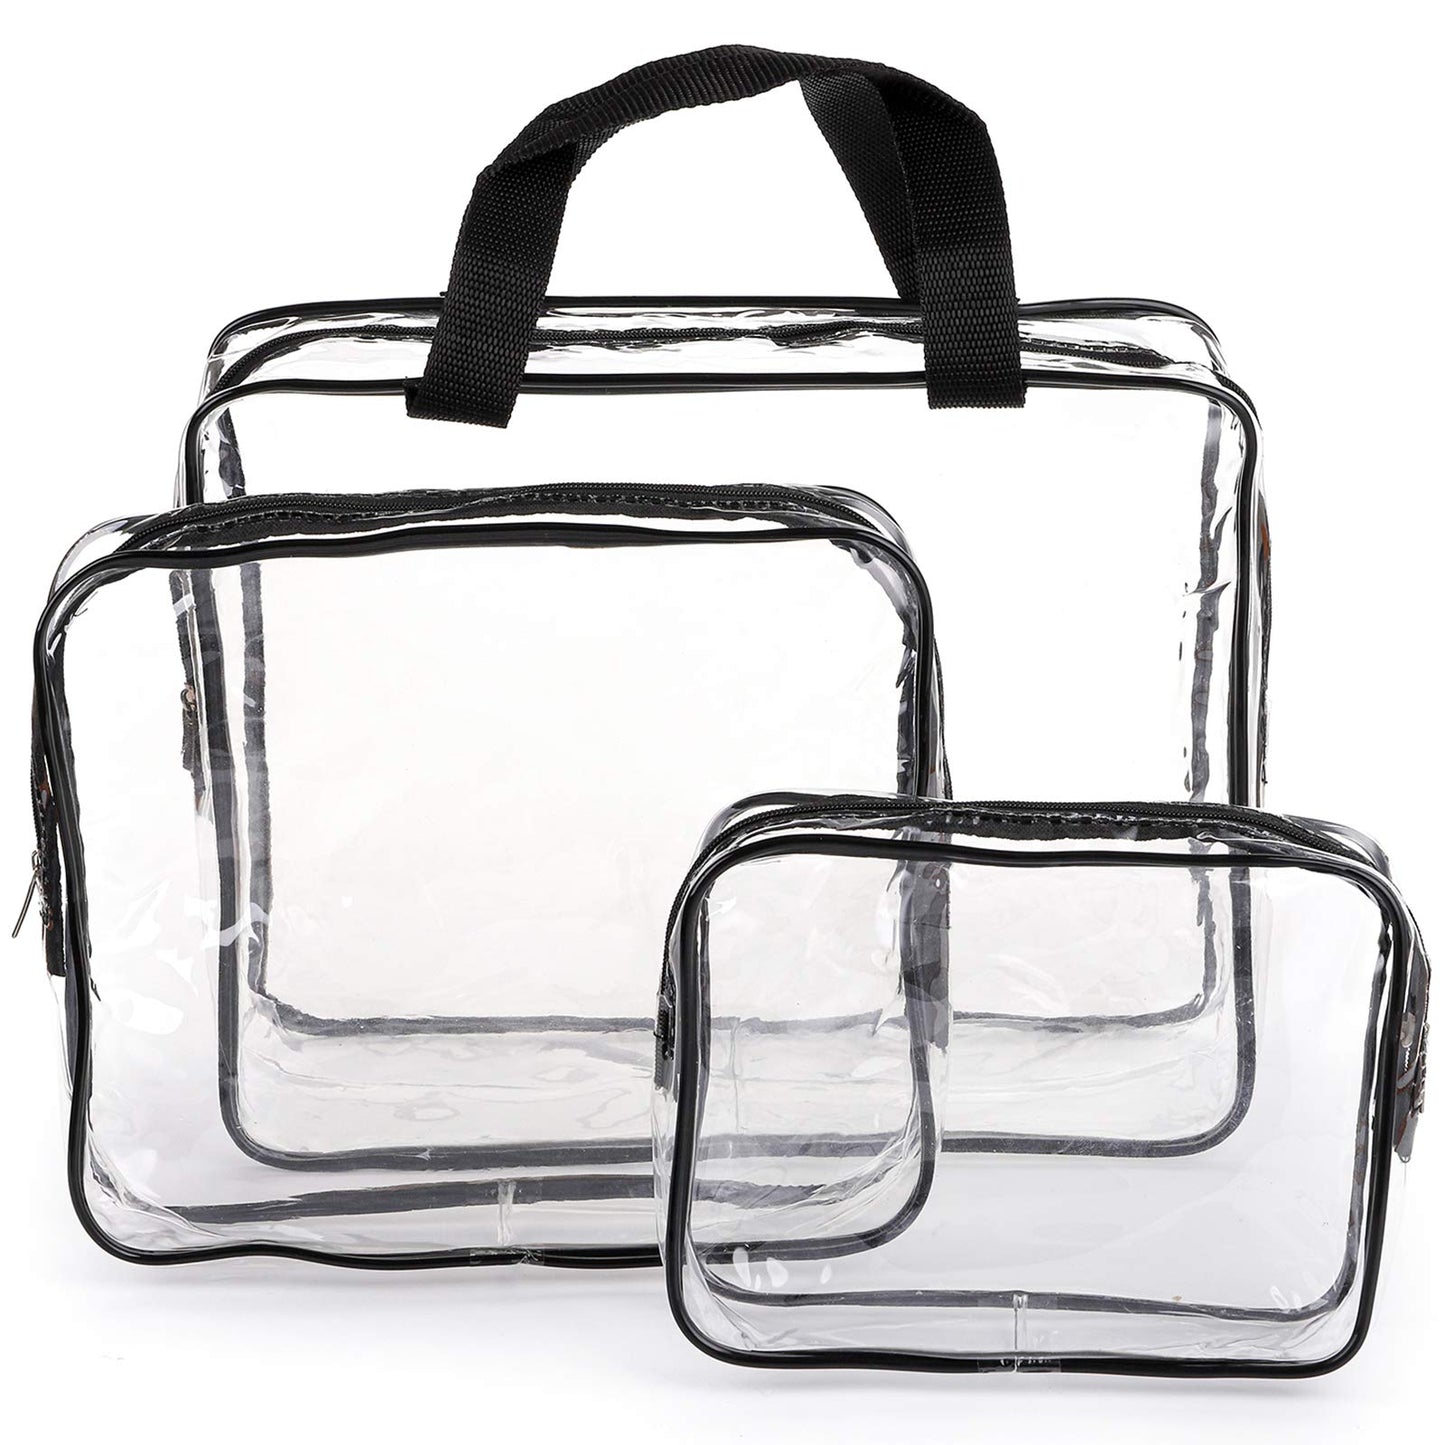 Hedume Set of 9 Clear Makeup Bags, TSA Approved Clear Toiletry Bag Set, Waterproof Clear PVC with Zipper Handle Portable Travel Luggage Pouch